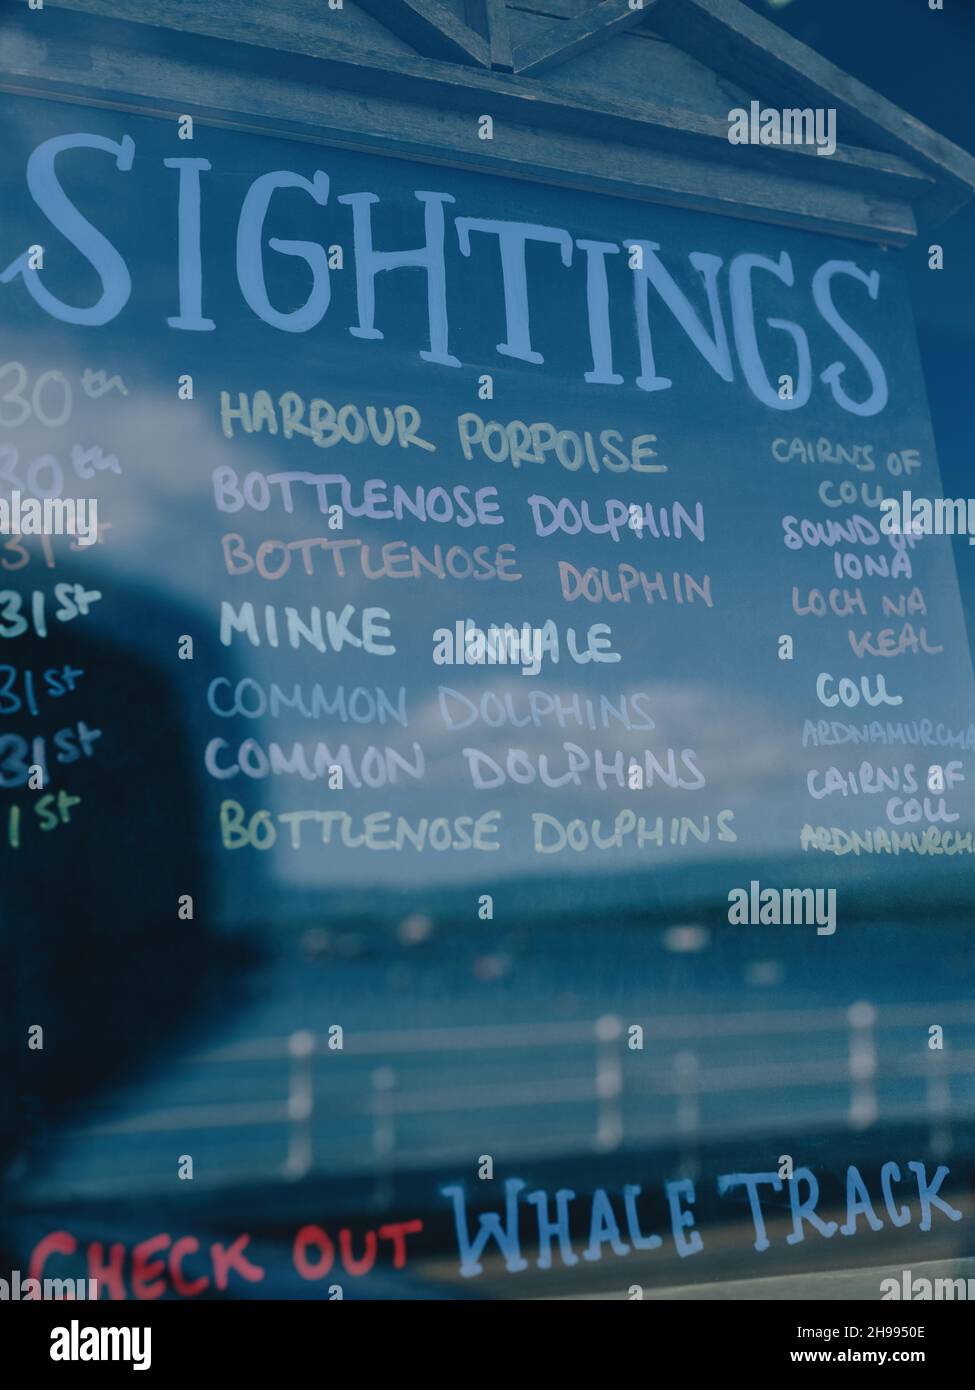 Ecotourism - Whales, Dolphins & Porpoise sightings displayed on a board in a shop window in Tobermory on the Ilse of Mull, Inner Hebrides, Scotland UK Stock Photo